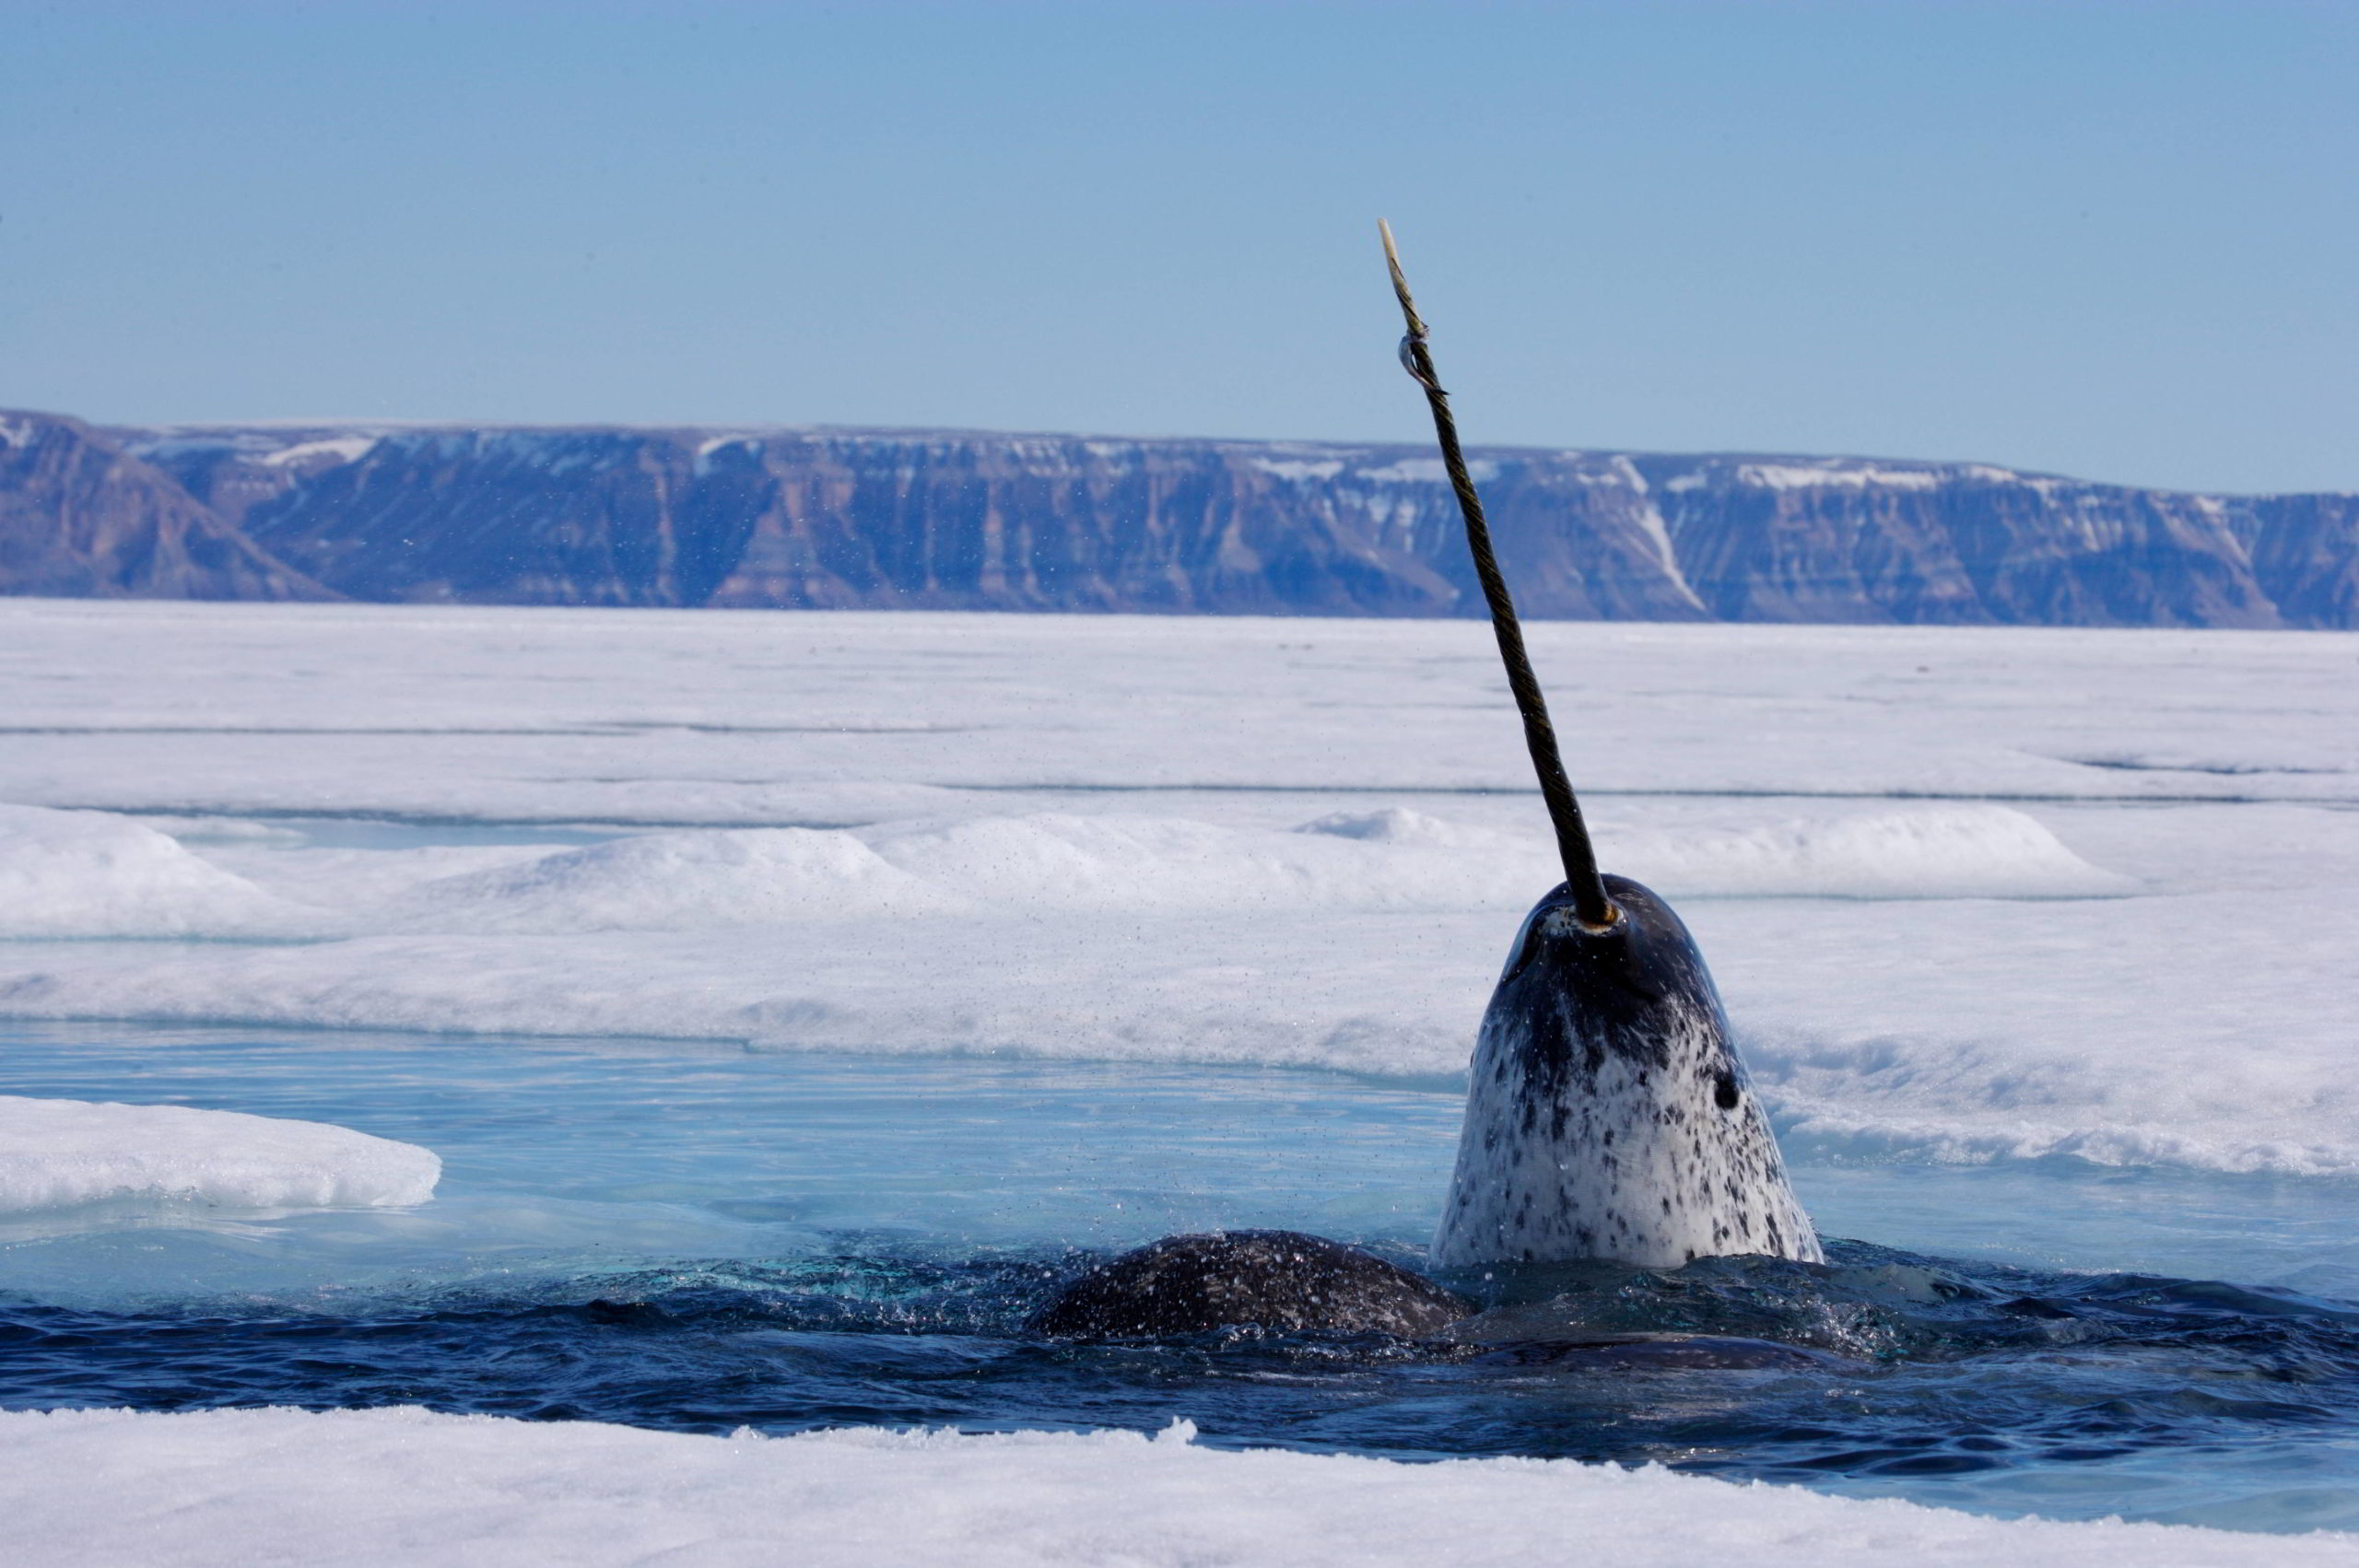 Image of a sole narwhal surfacing through a break in the ice.